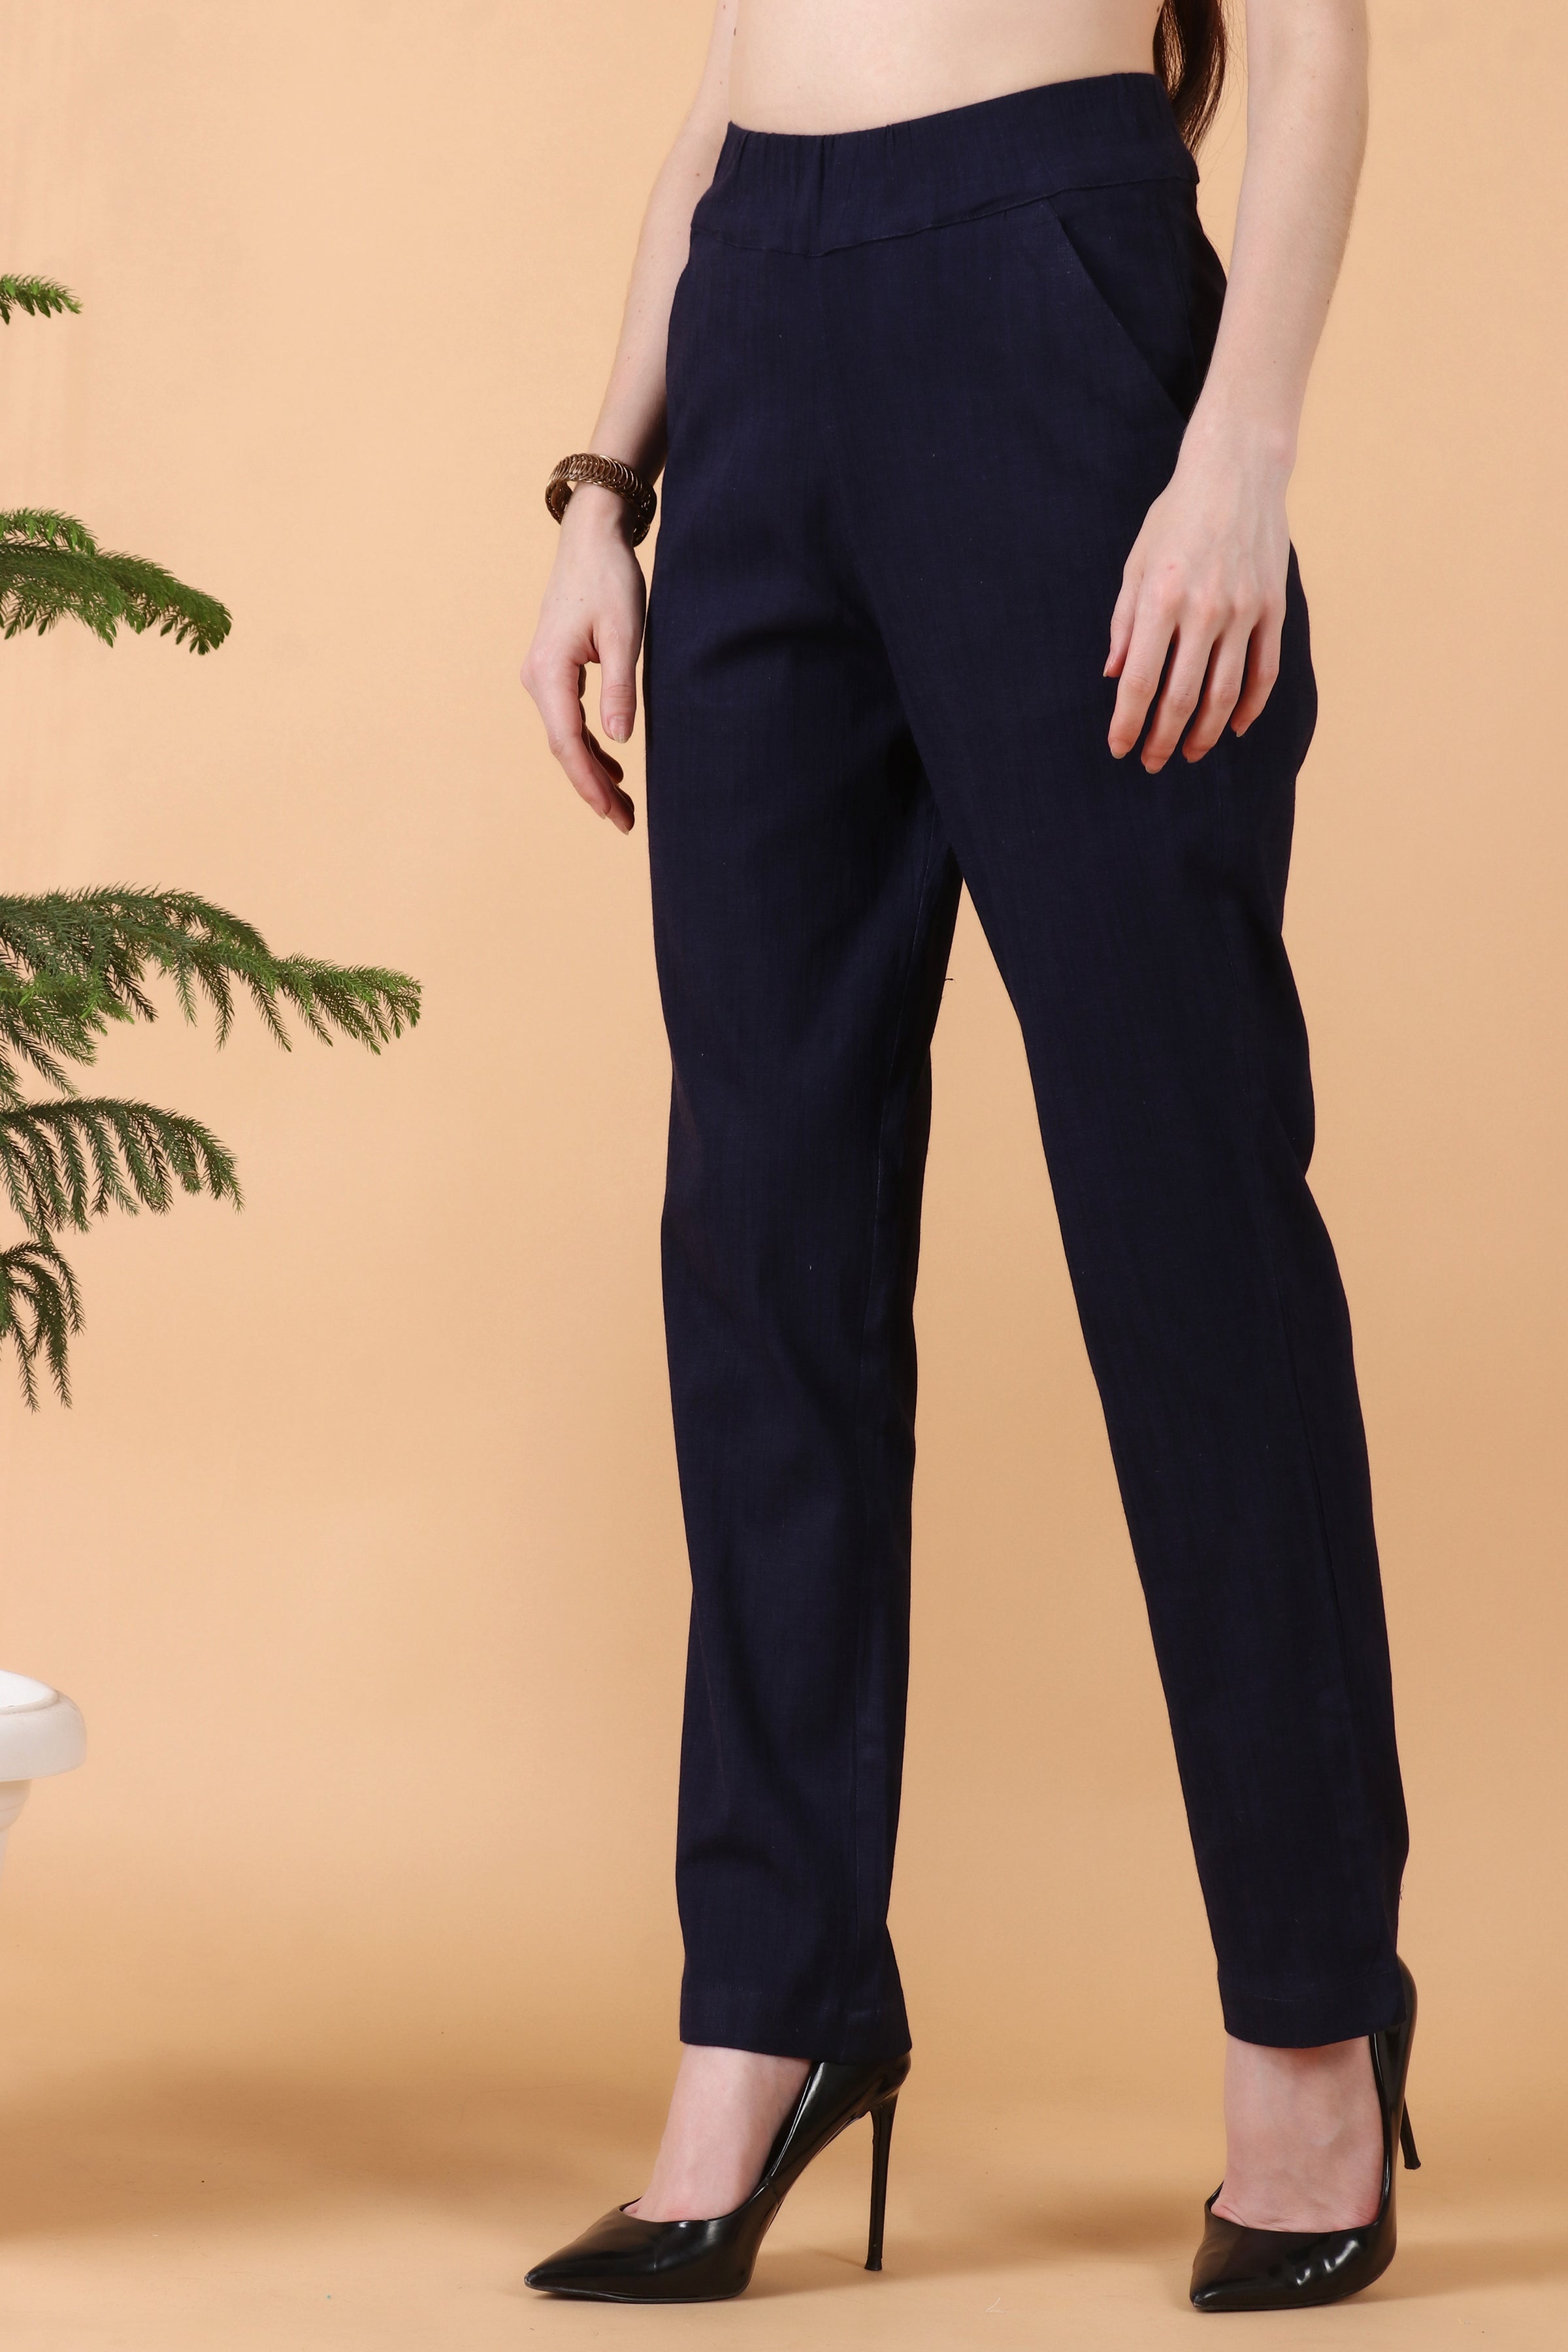 Buy Cotton Lycra Slim Fit Stretch Pant for Women Online at Fabindia |  20054105